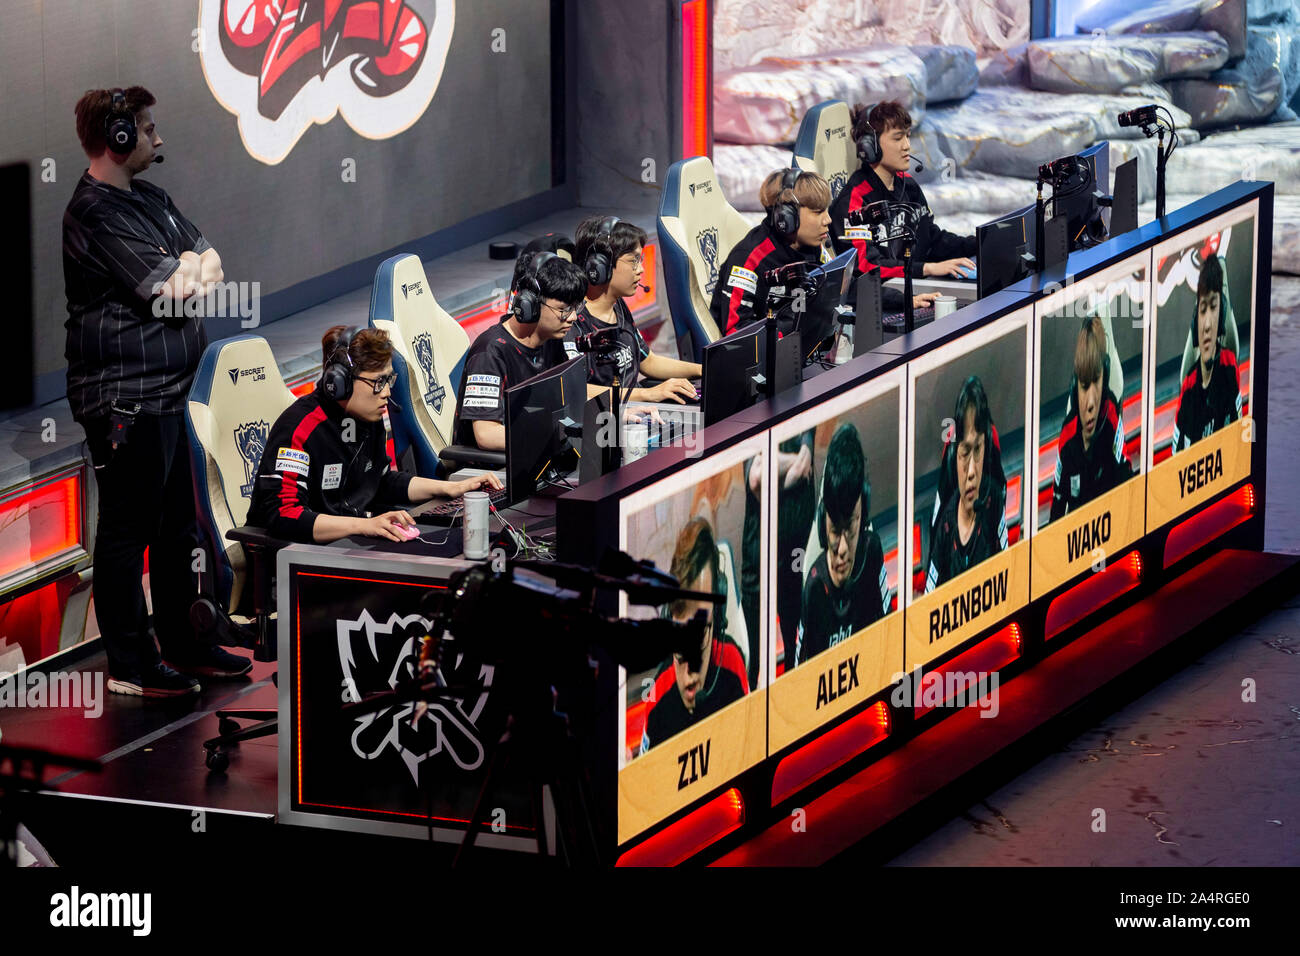 Berlin Germany 13th Oct 19 The E Sports Team Ahq E Sports Club Will Compete In